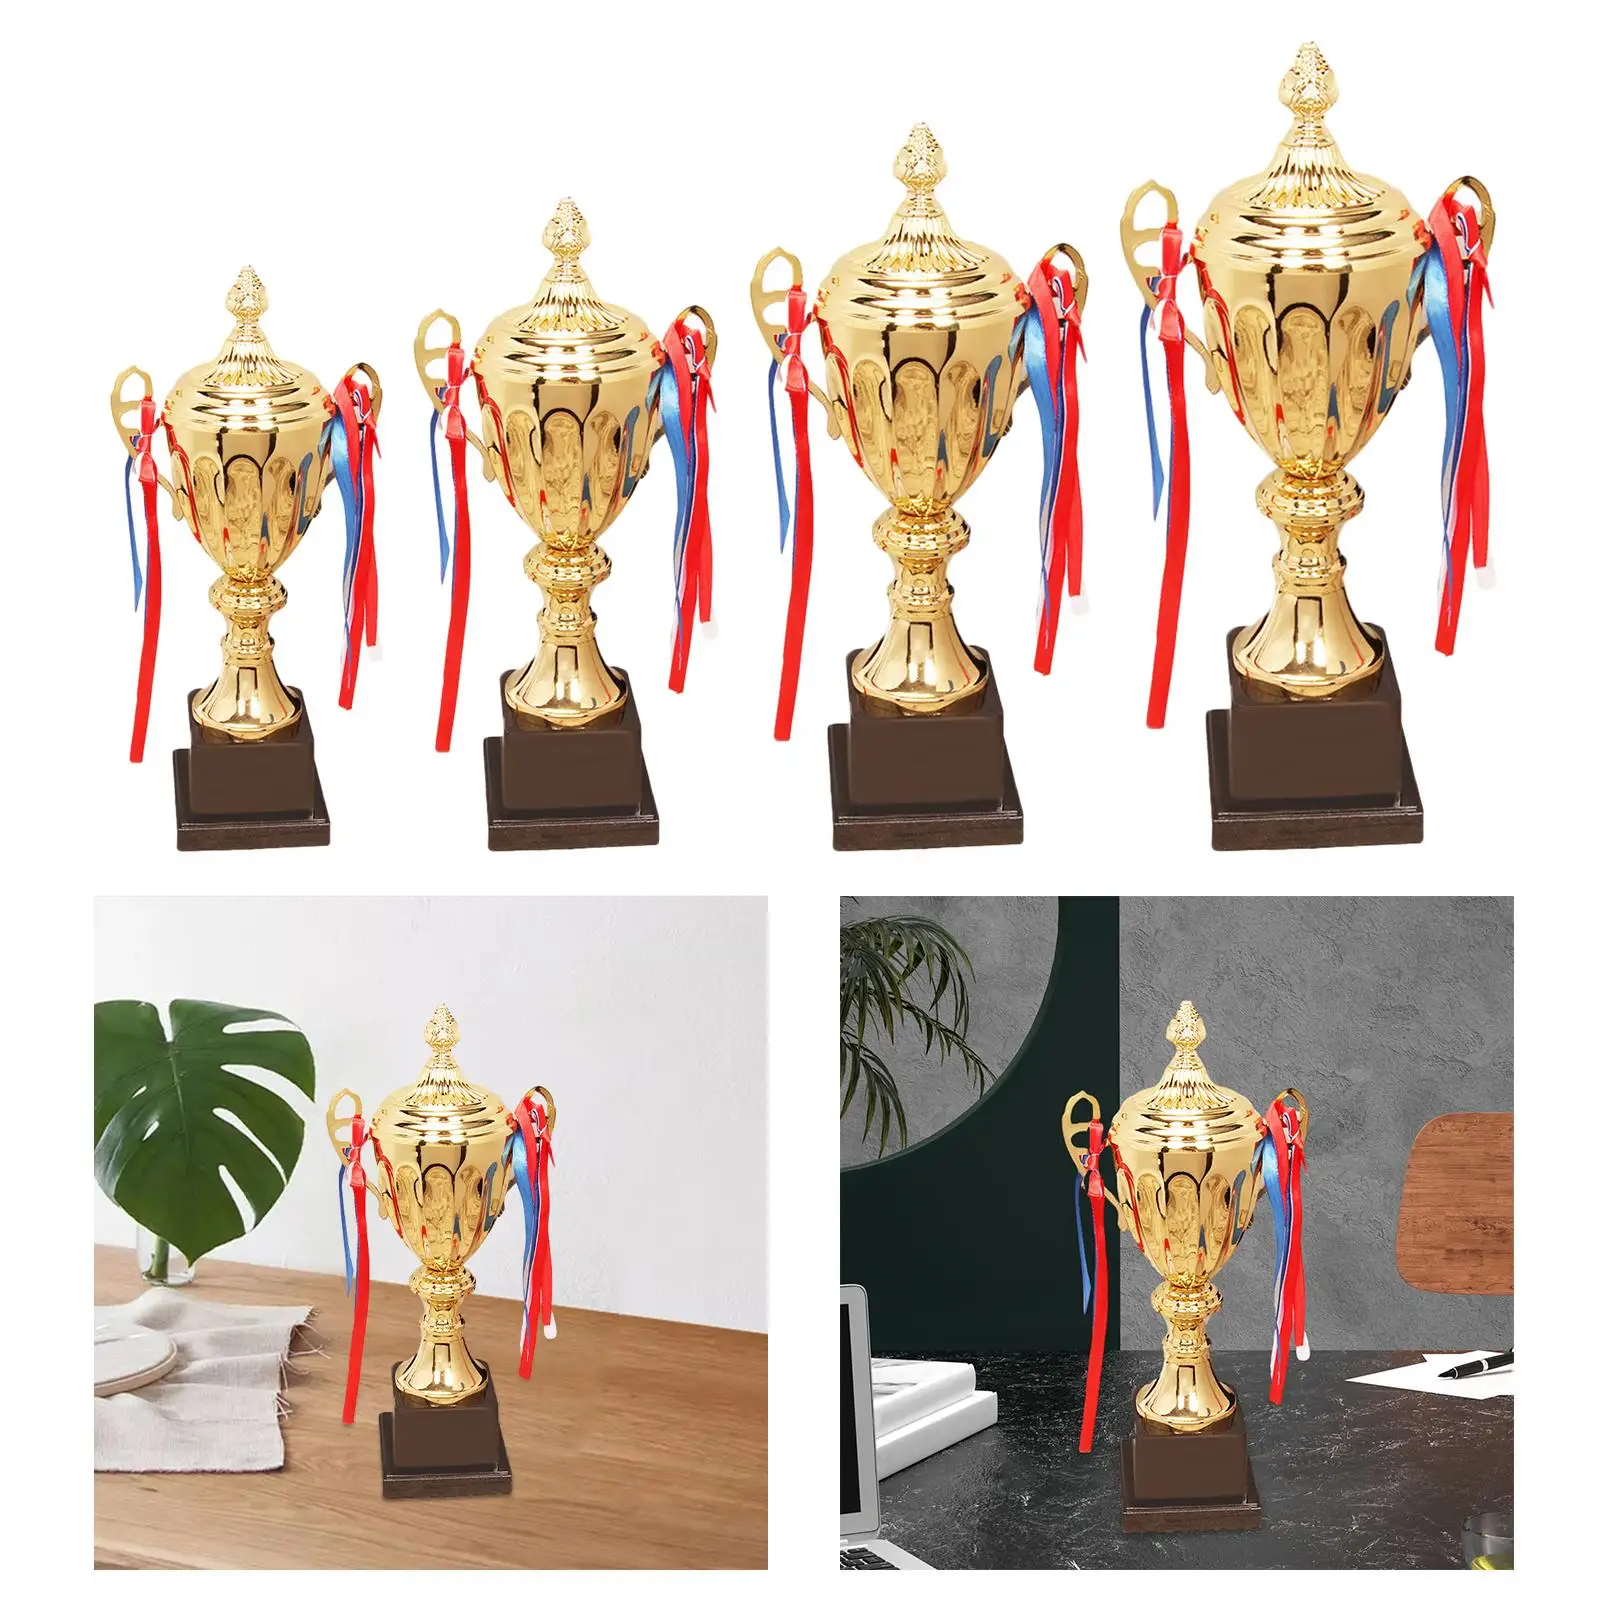 Award Trophy Competitions Winning Reward Prize Trophy Cup for Celebrations Championships Baseball Competition Decorations